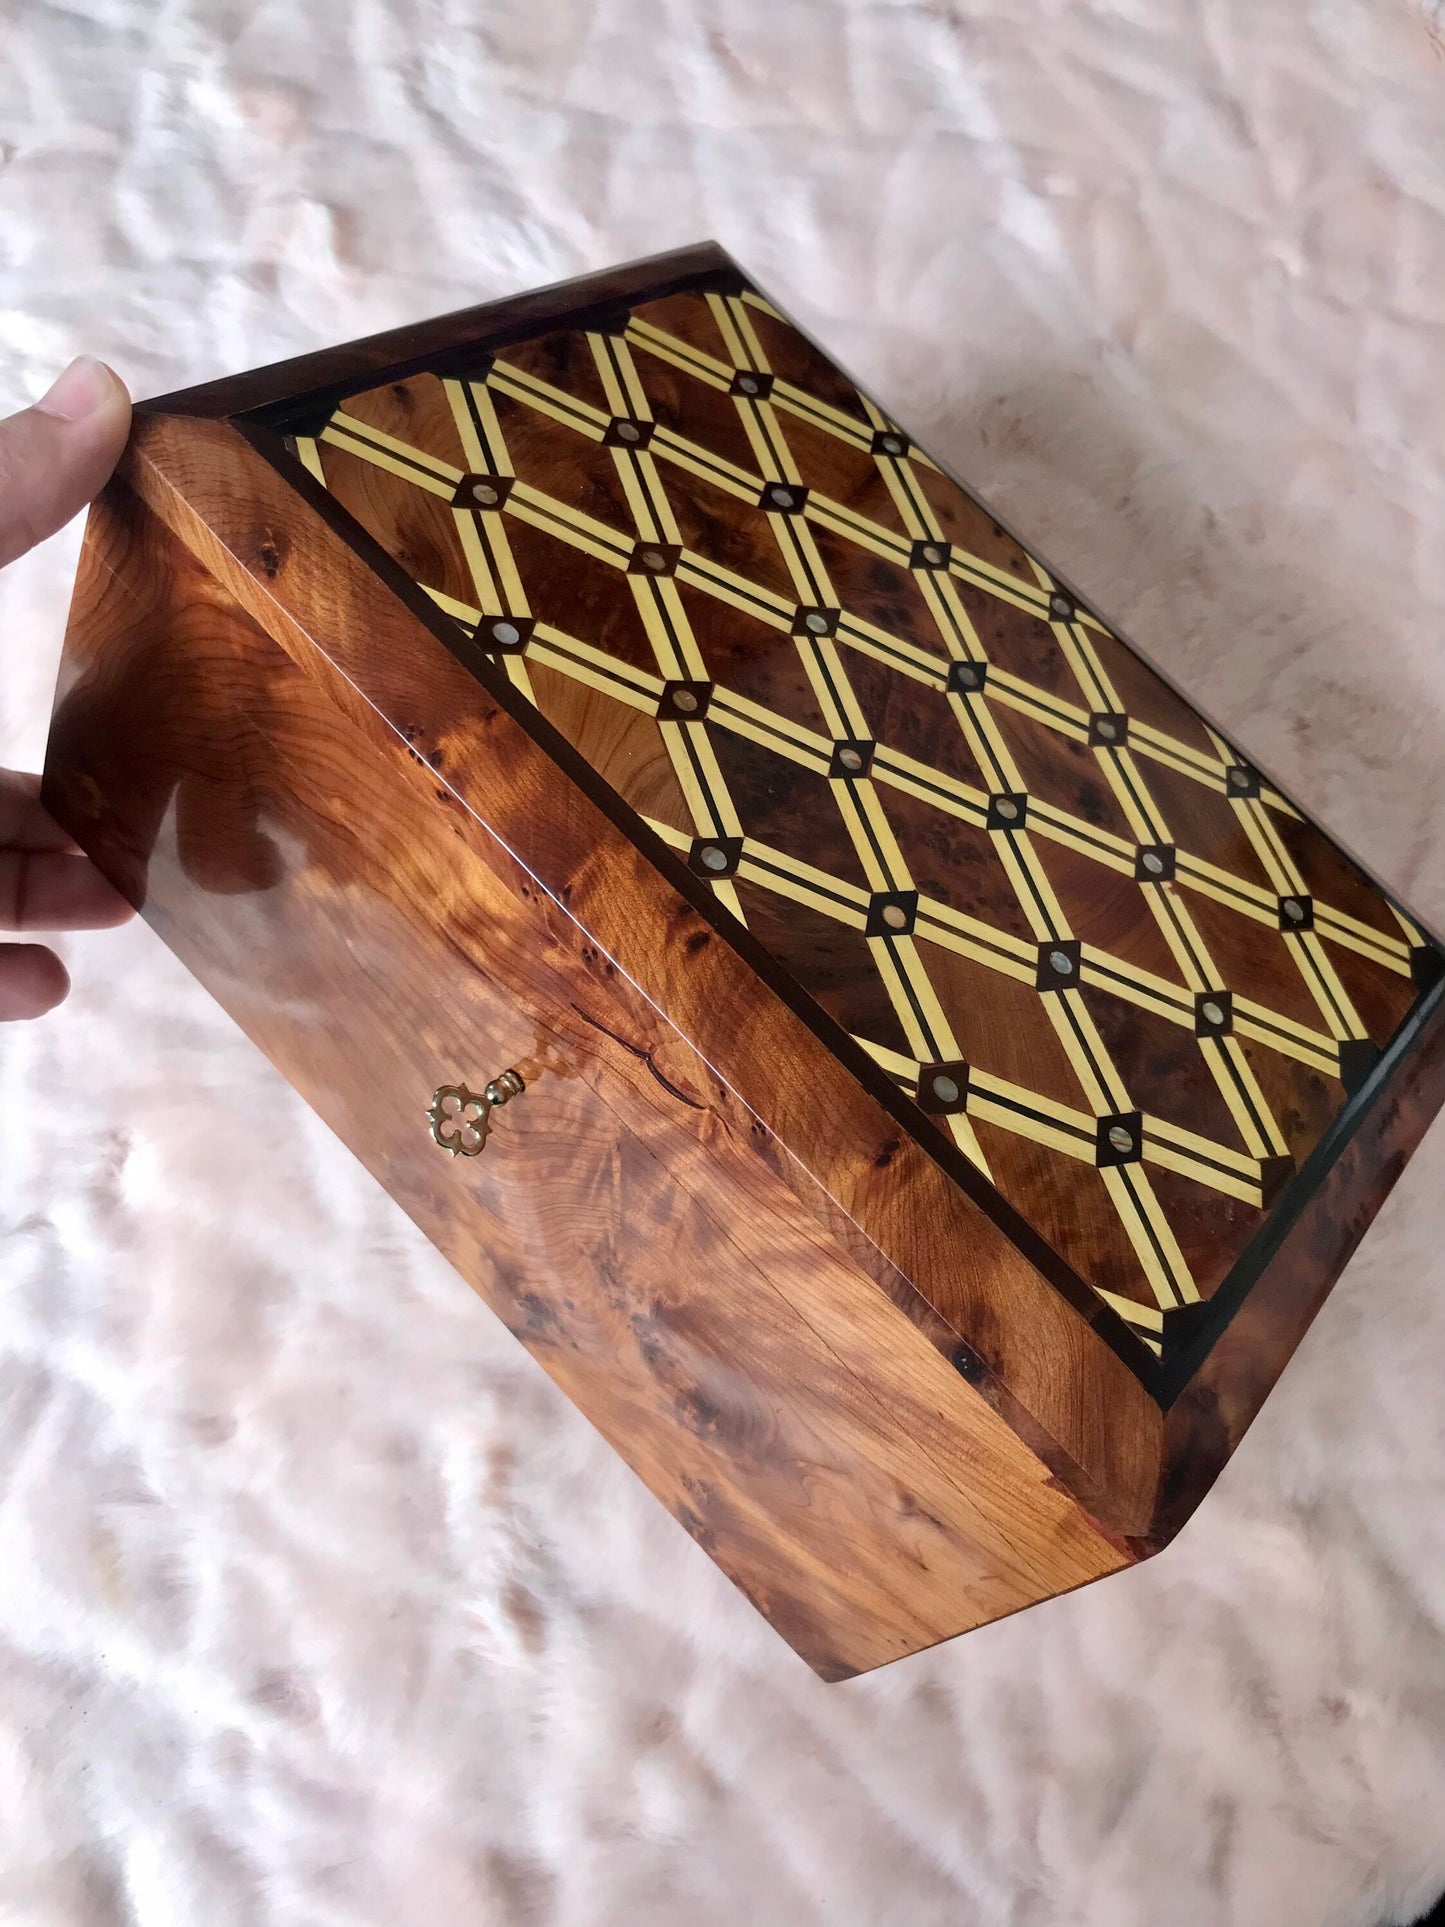 Moroccan lockable Thuya burl Jewelry wooden Box with key,inlaid with mother of pearl and lemon wood,Gift idea,wife,girl,mother anniversary